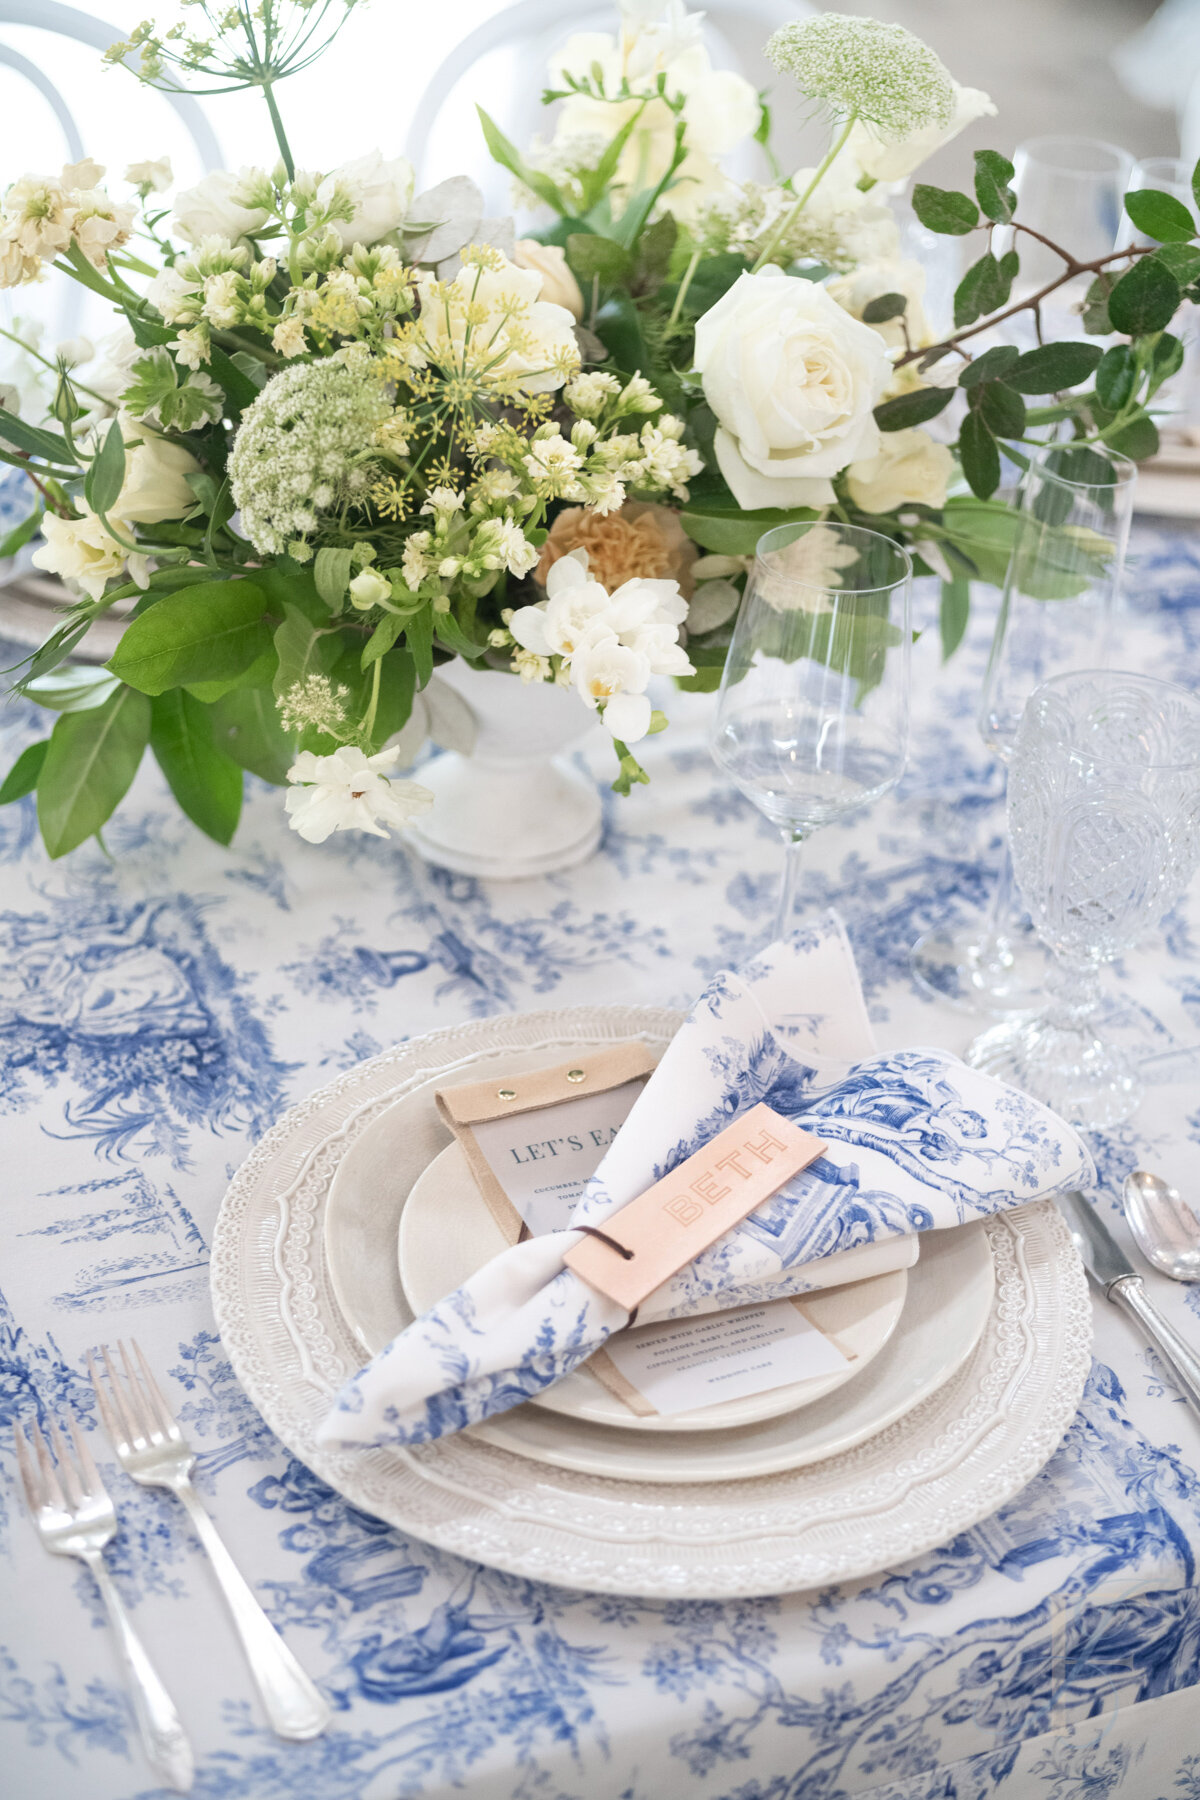 Pink-Champagne-Designs-placesetting-design-blue-and-patterns